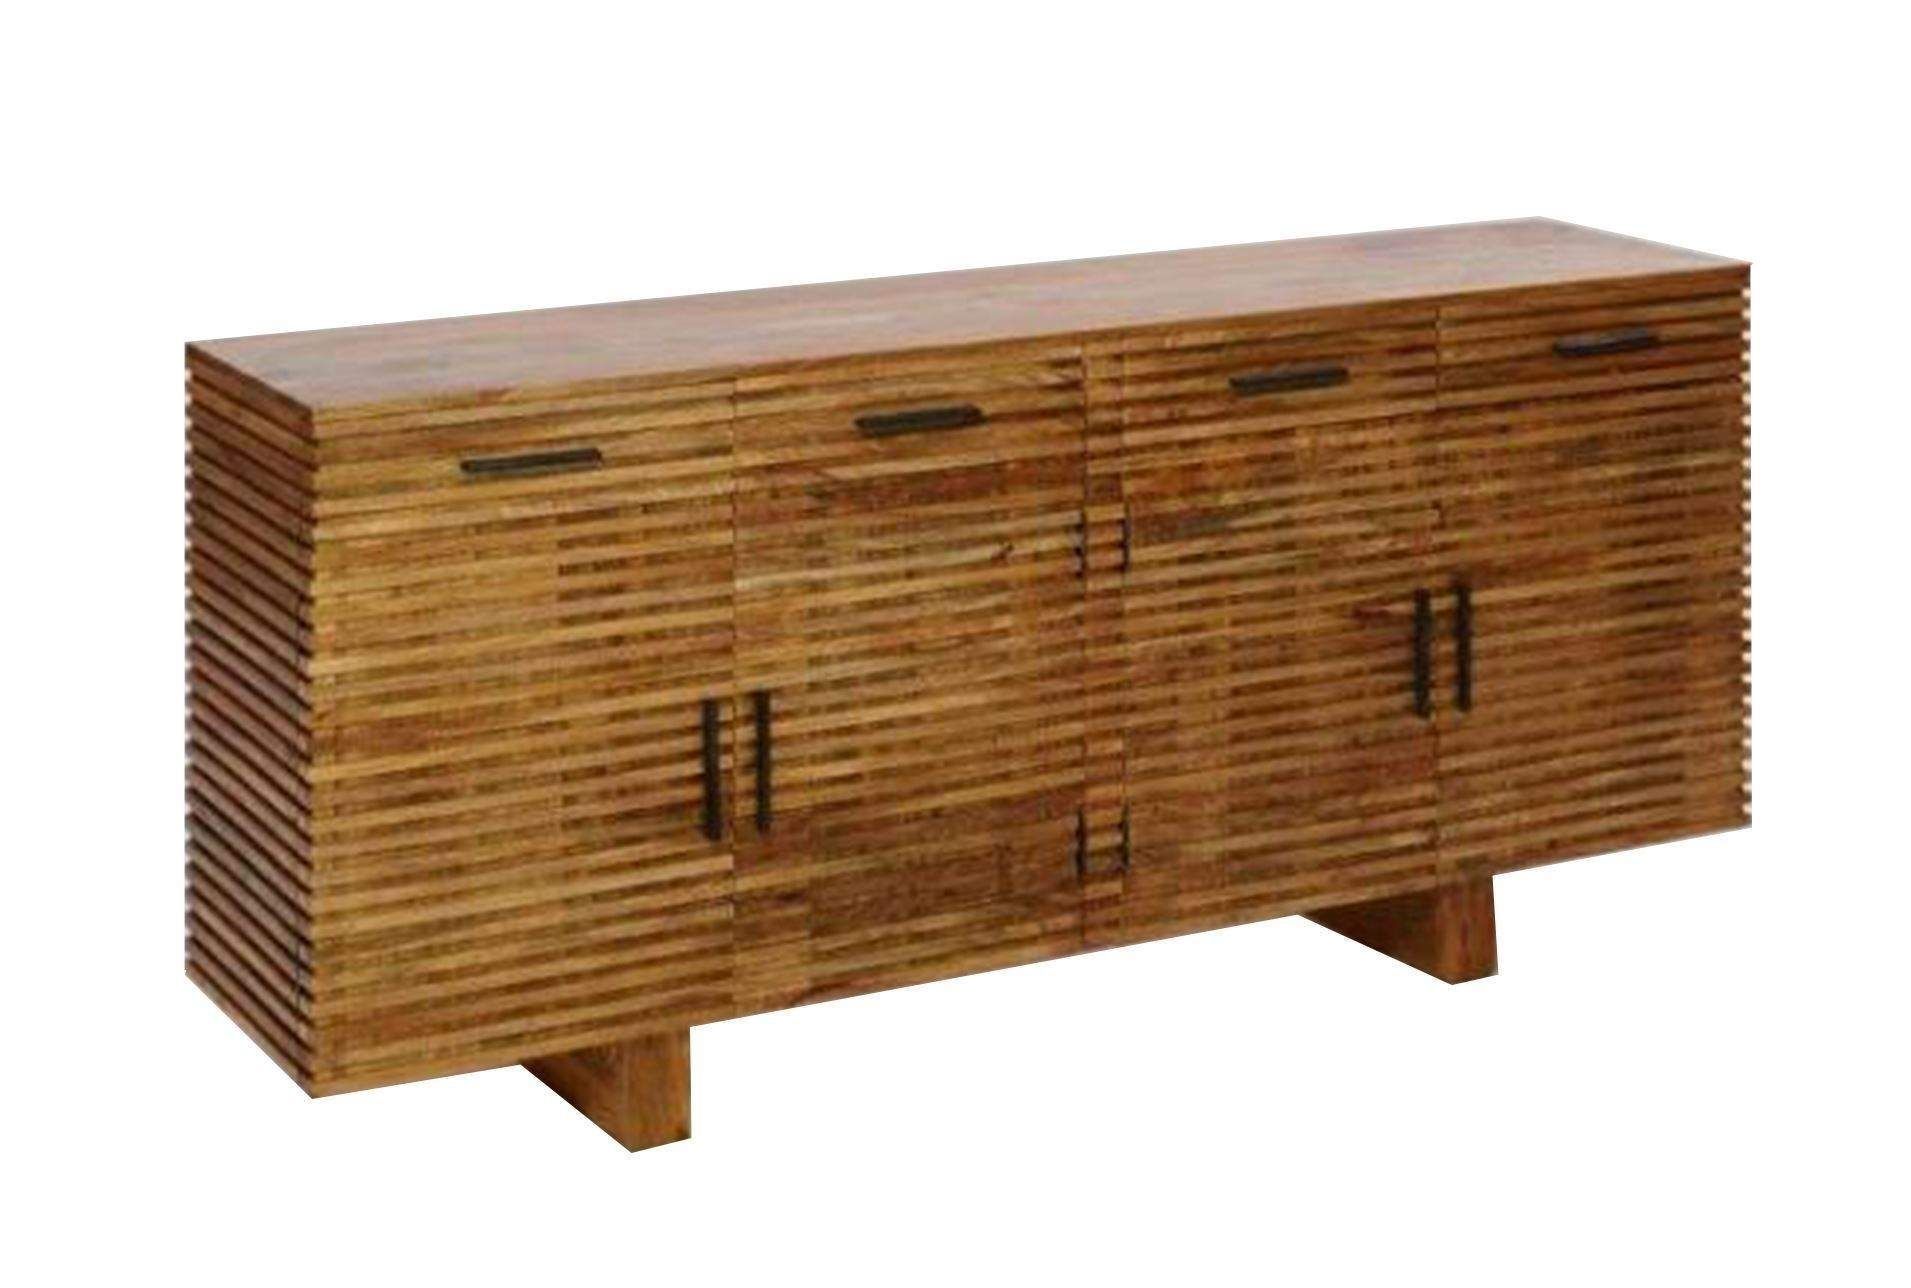 Corrugated Natural 4 Drawer Sideboard | Drawers Regarding Best And Newest Burnt Oak Wood Sideboards (View 8 of 20)